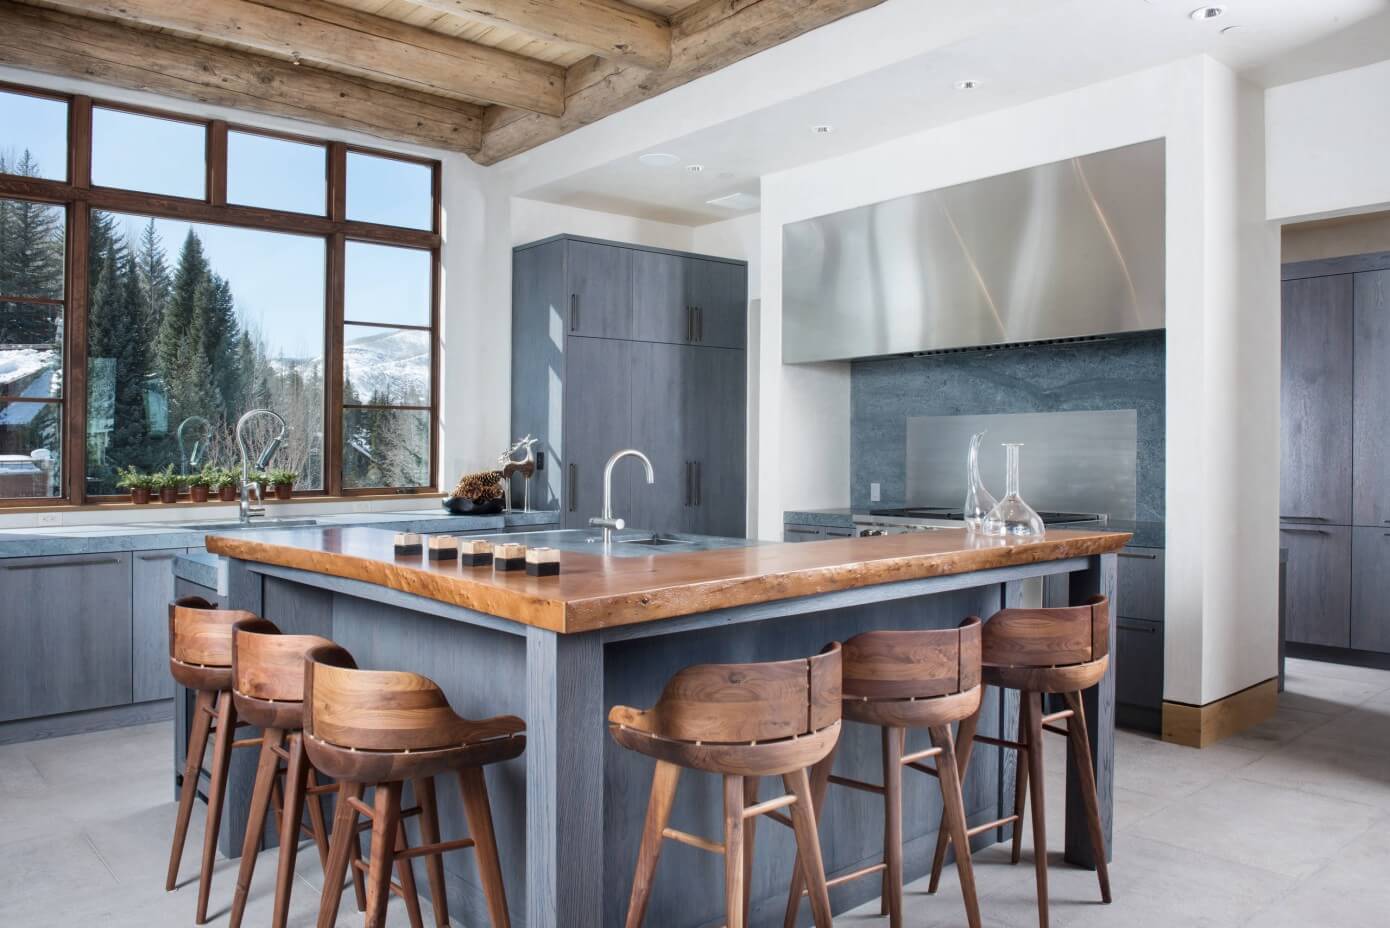 Vail Ski Hause by Reed Design Group